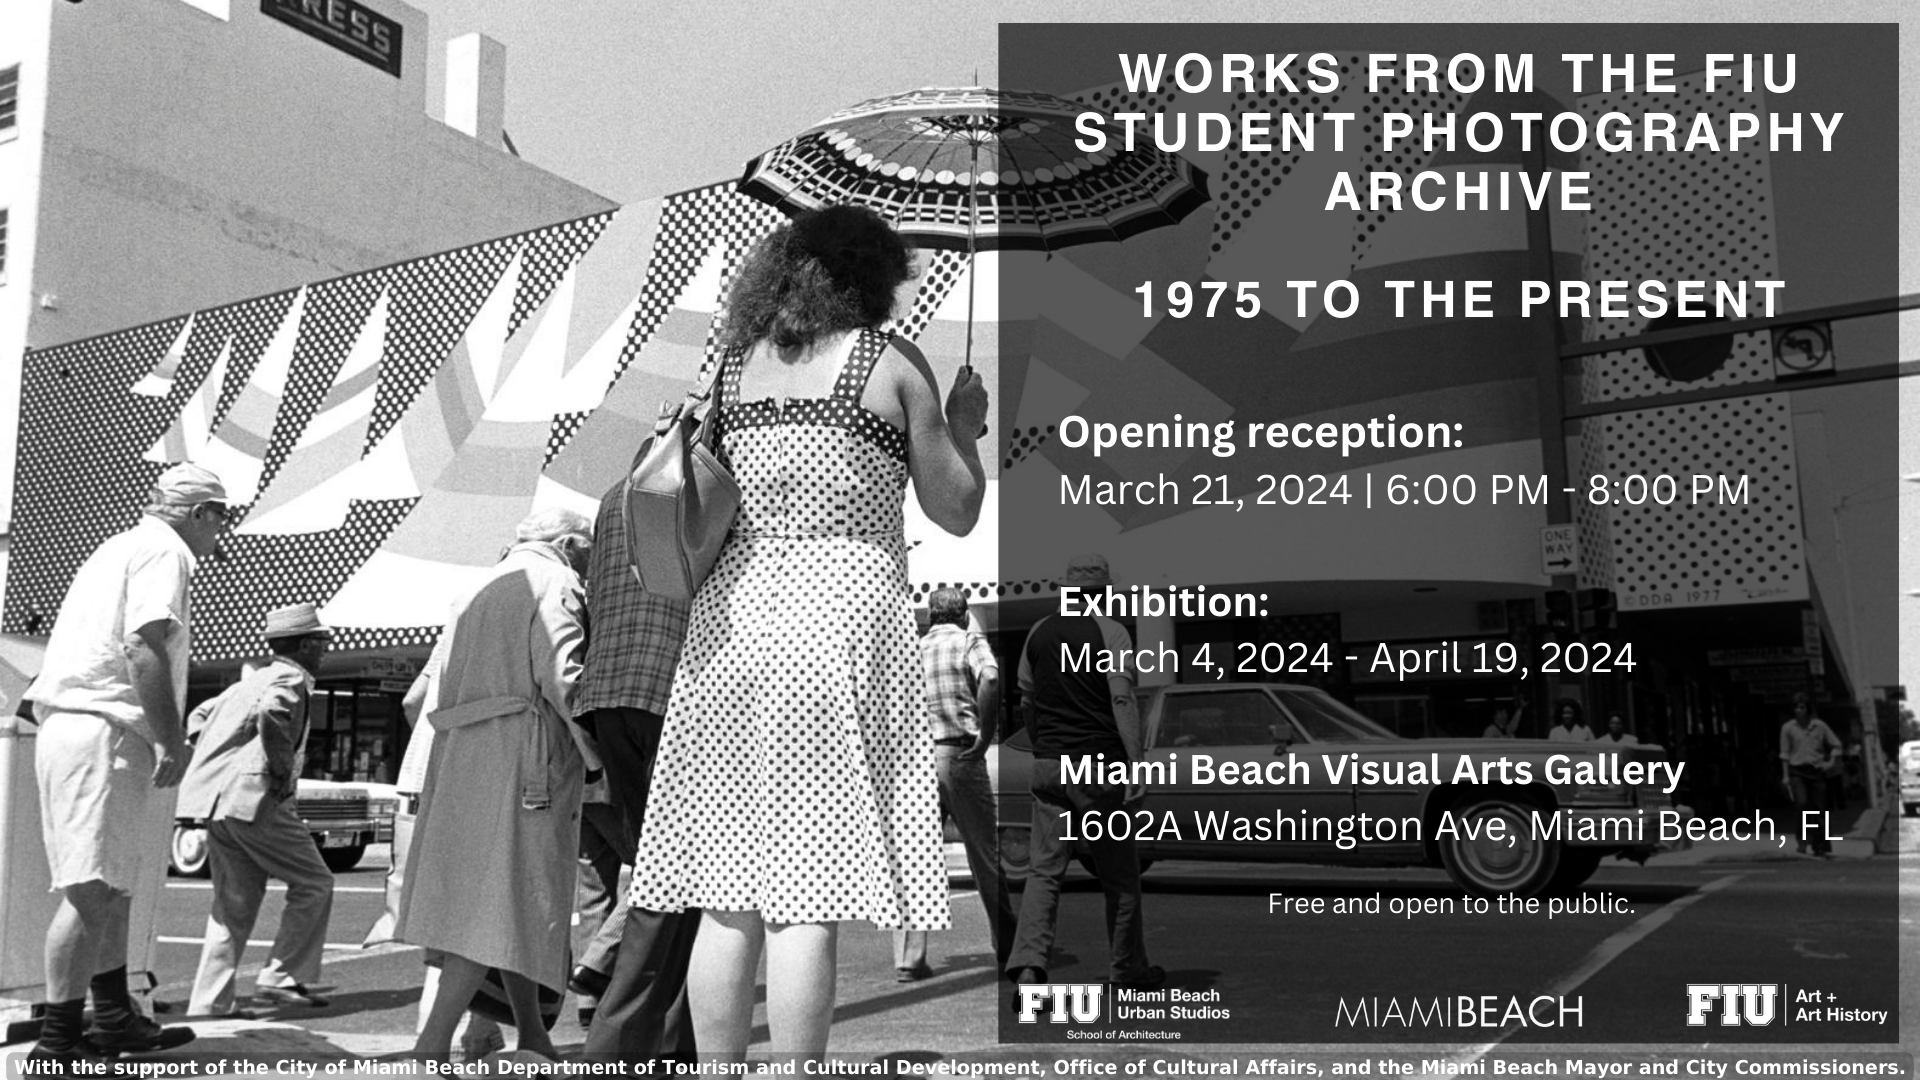 FIU Student Photography Archive flyer